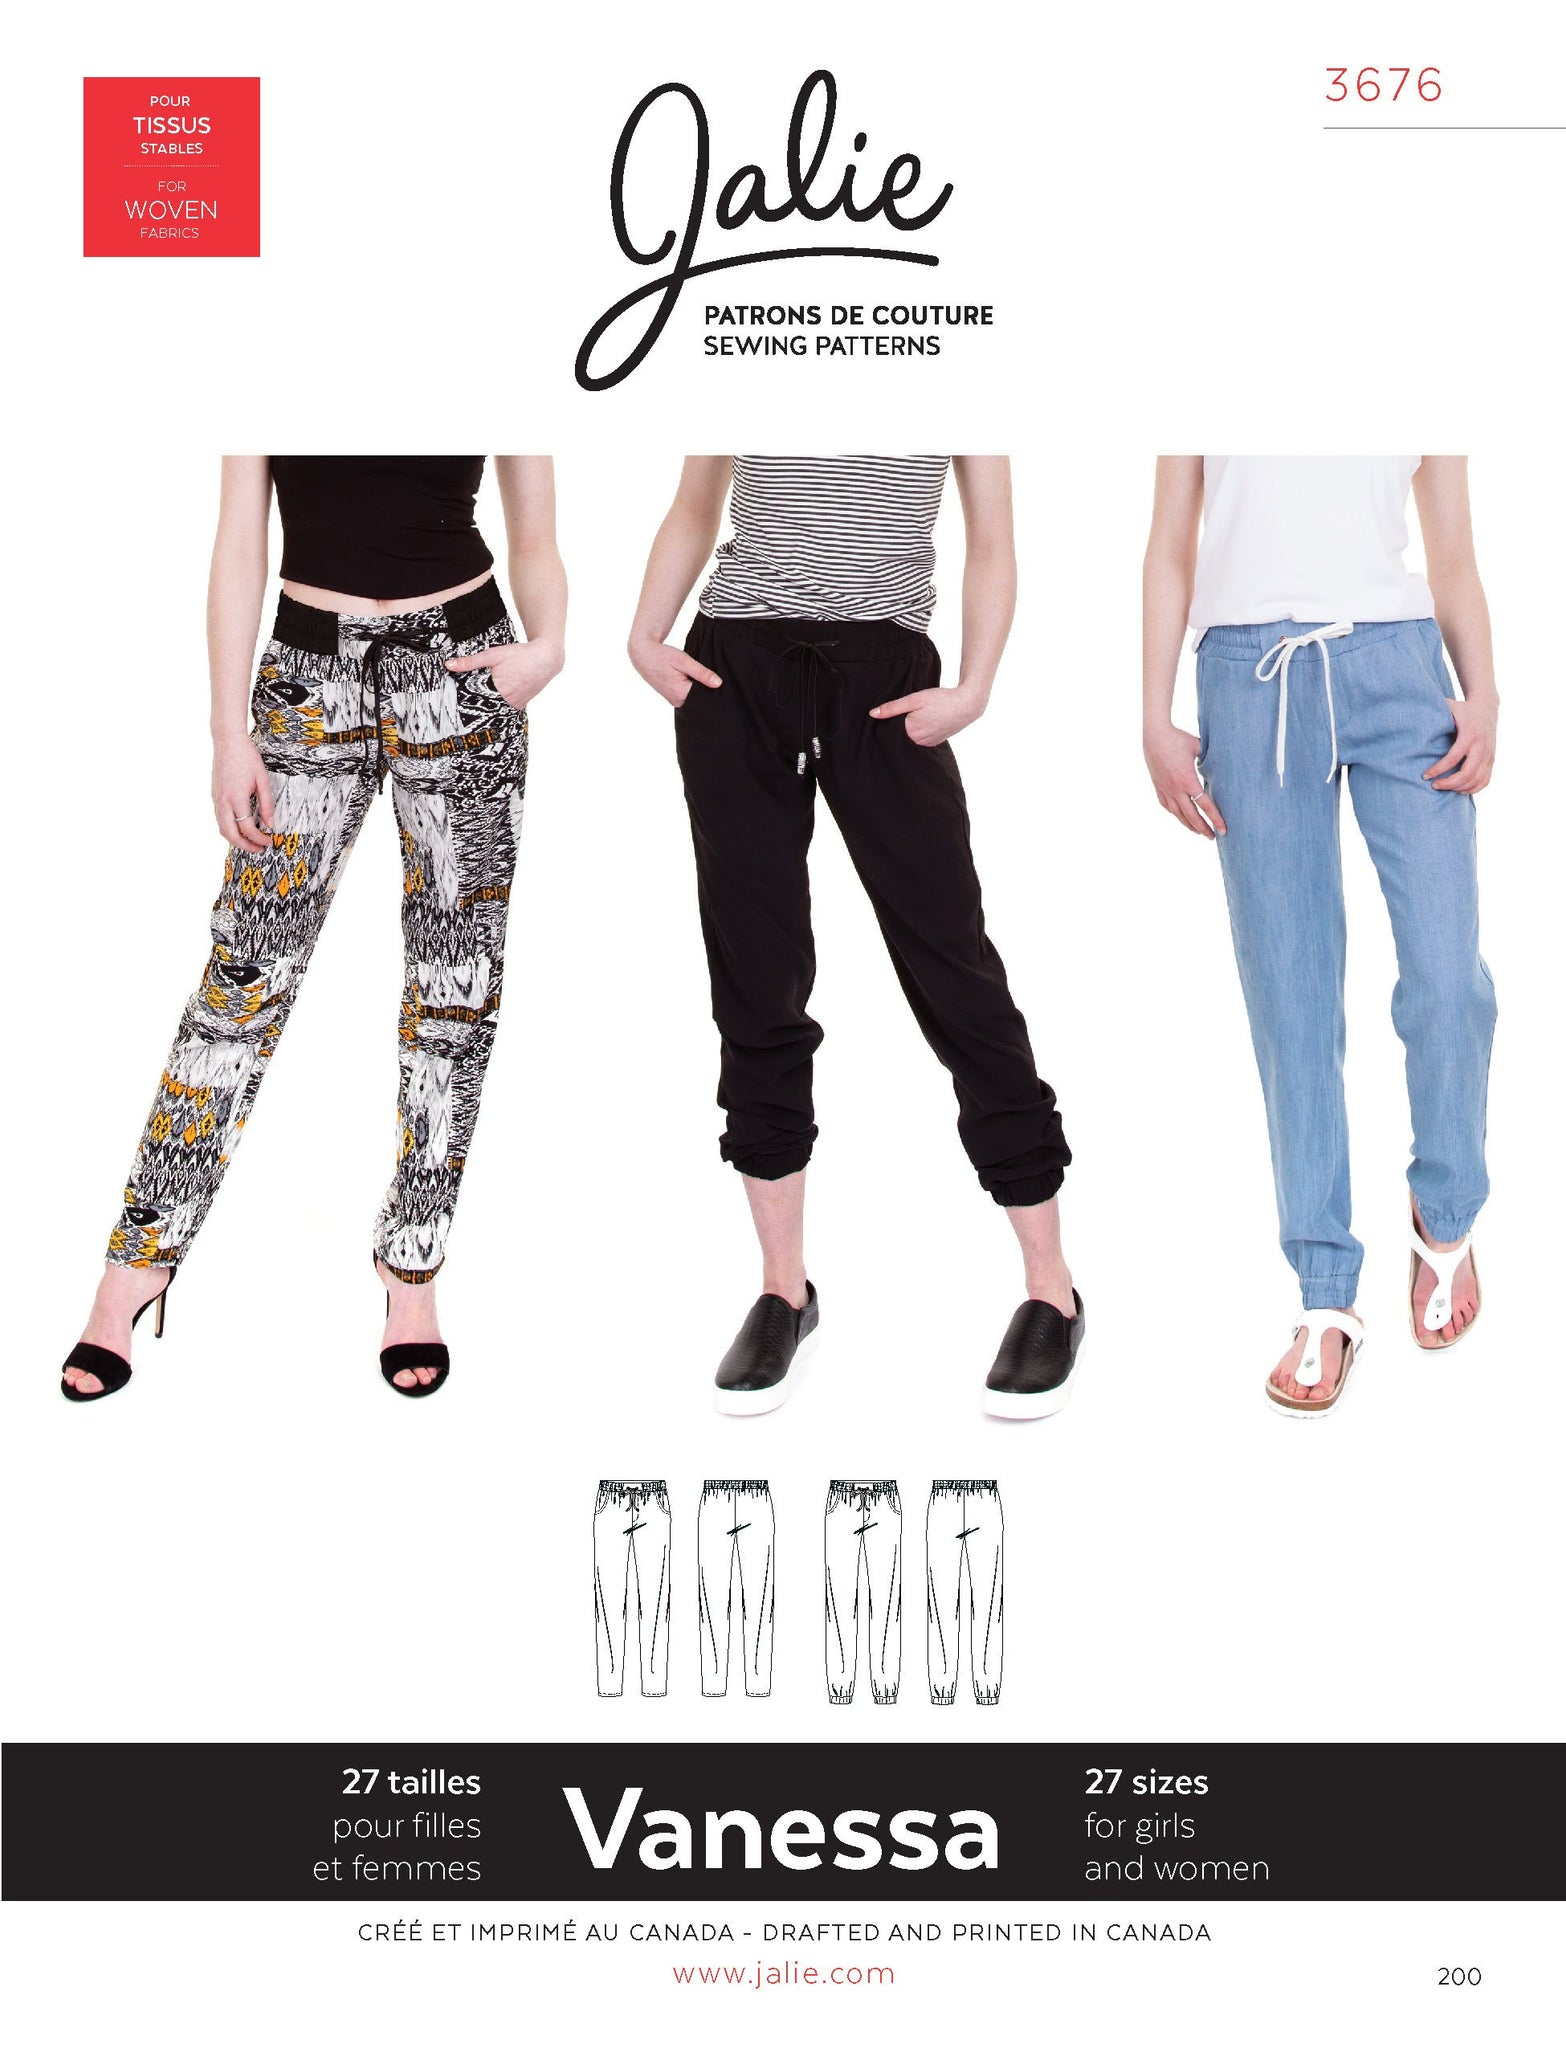 Fluid Pants Lightweight woven pants with full elastic and drawstring waistband, tapered leg, slanted hip pockets and faux fly. A waisband inset keeps center front flat and allows for a cute color accent.  A: Hemmed at ankle length B: Elasticized cuffed hem